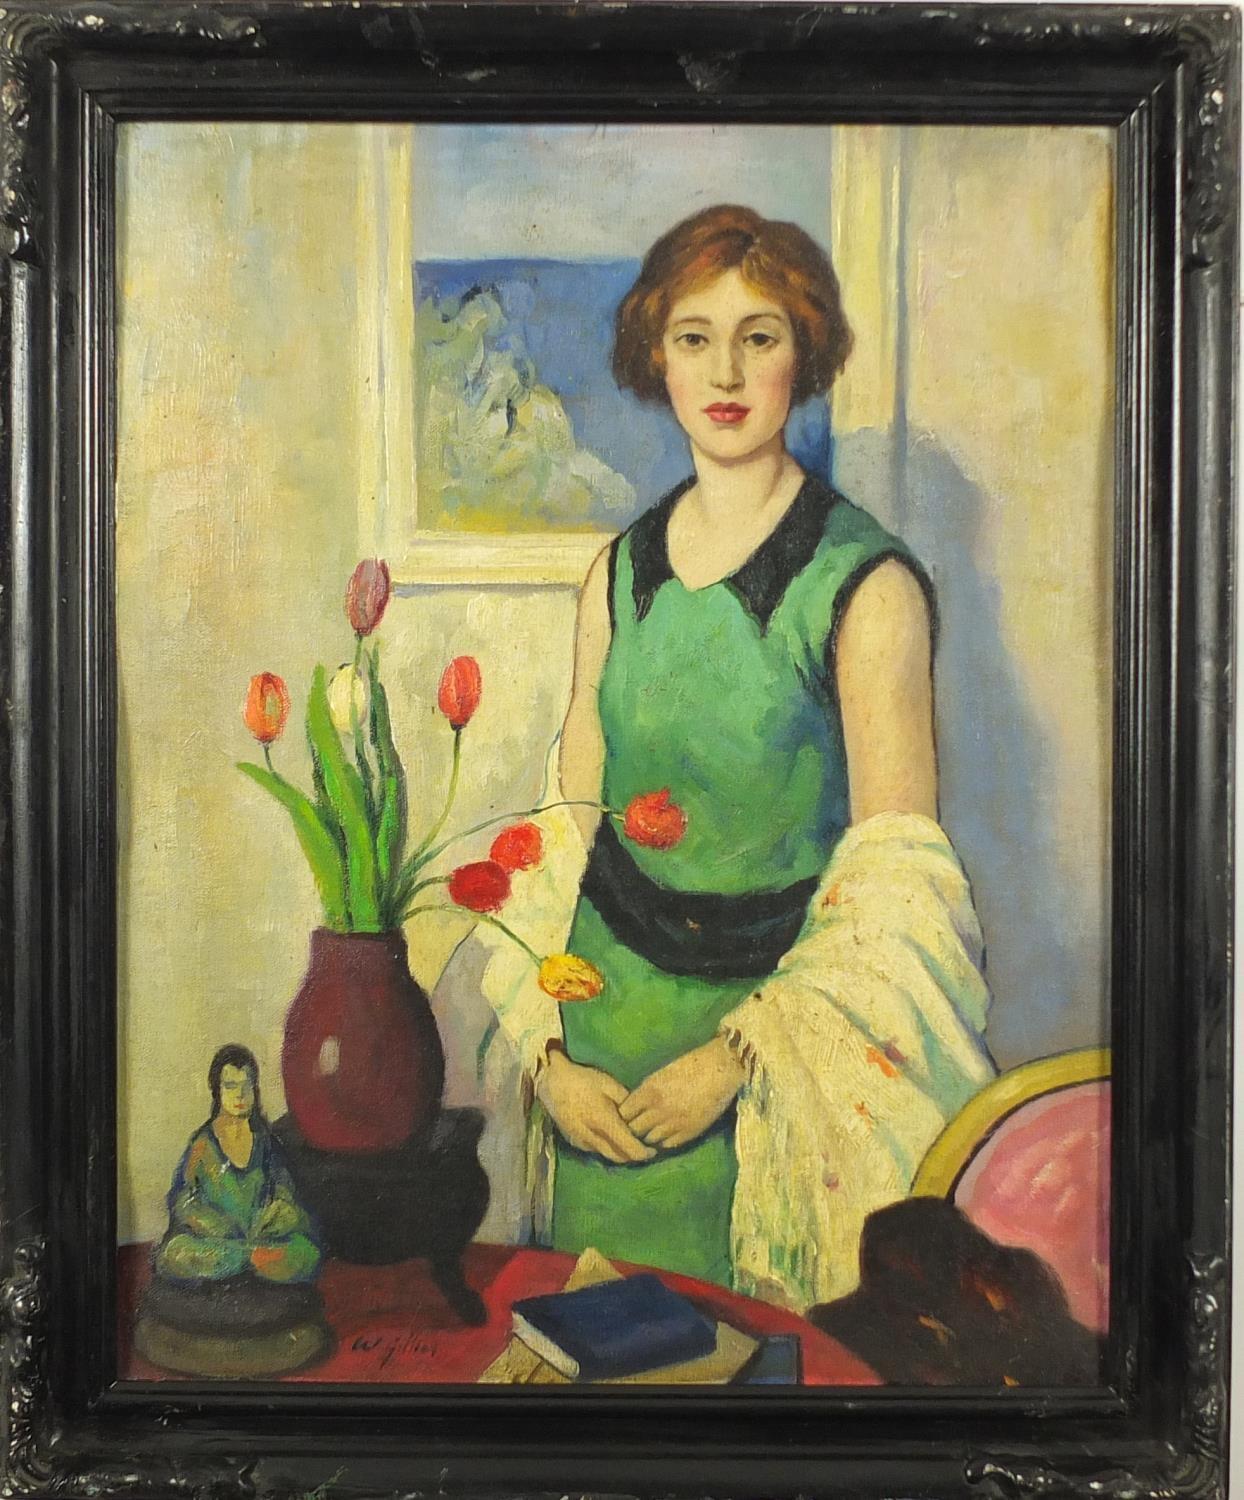 Manner of William George Gillies - Female in an interior with flowers in a vase, Scottish - Image 2 of 5